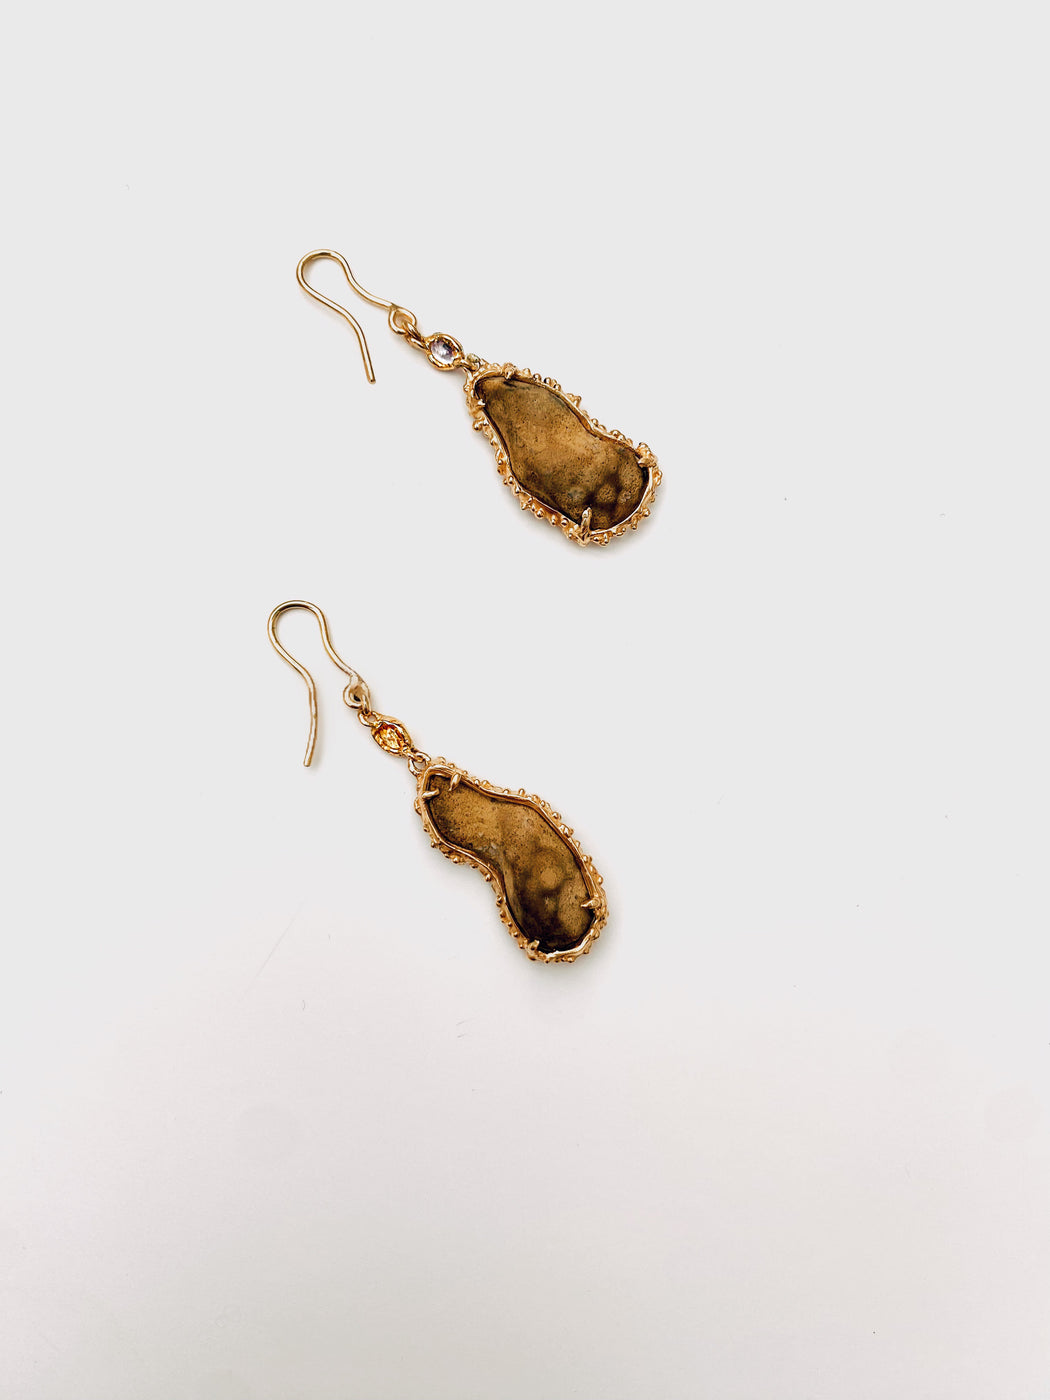 18 karat gold agate and sapphire earrings